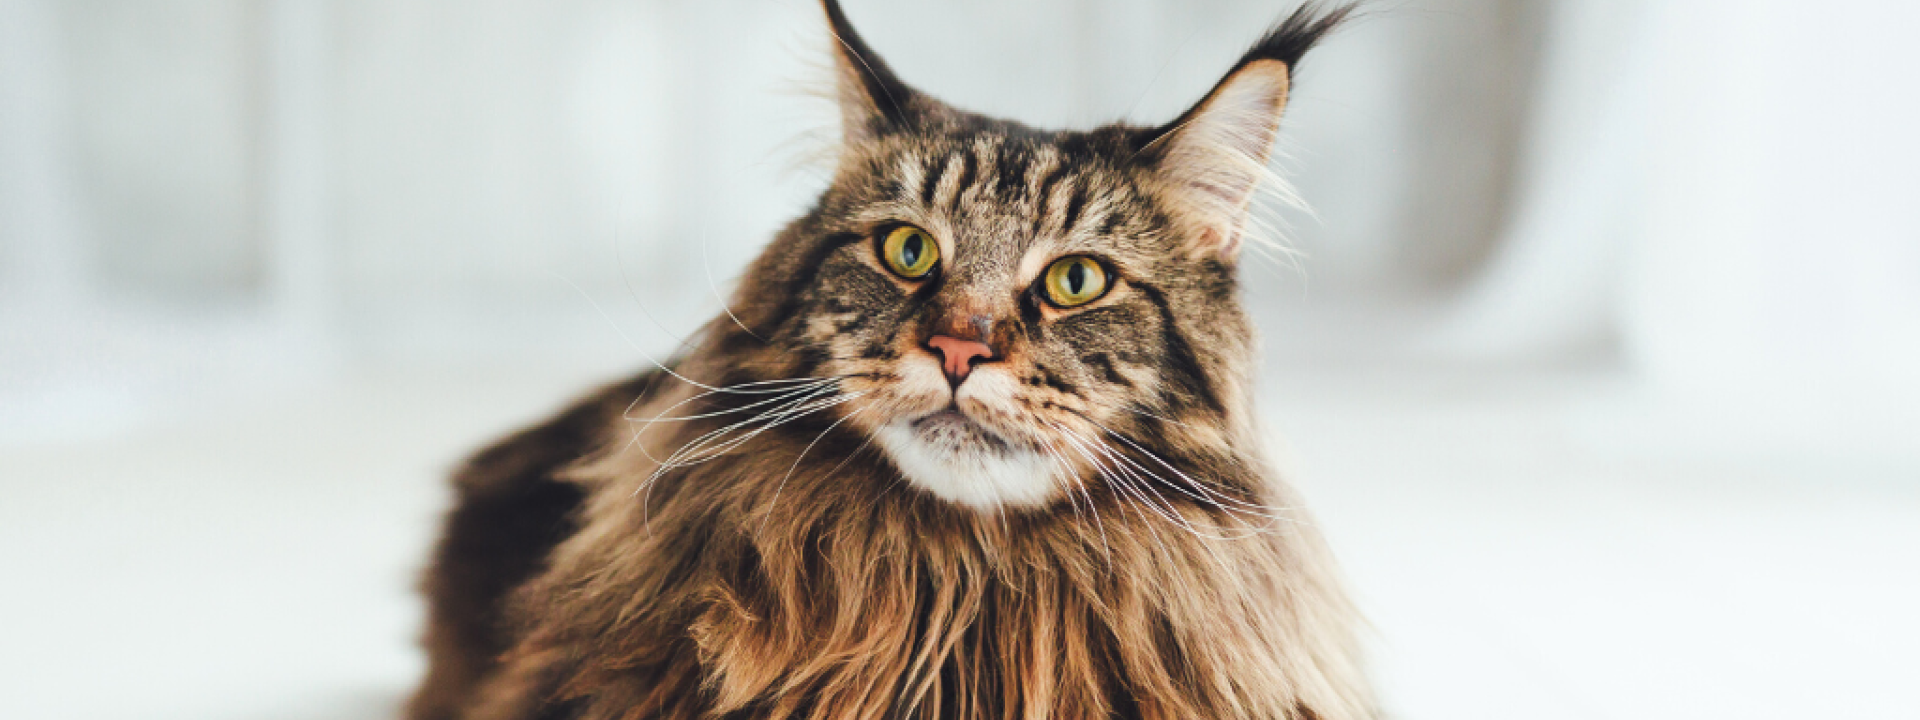 Maine coon cat on white background